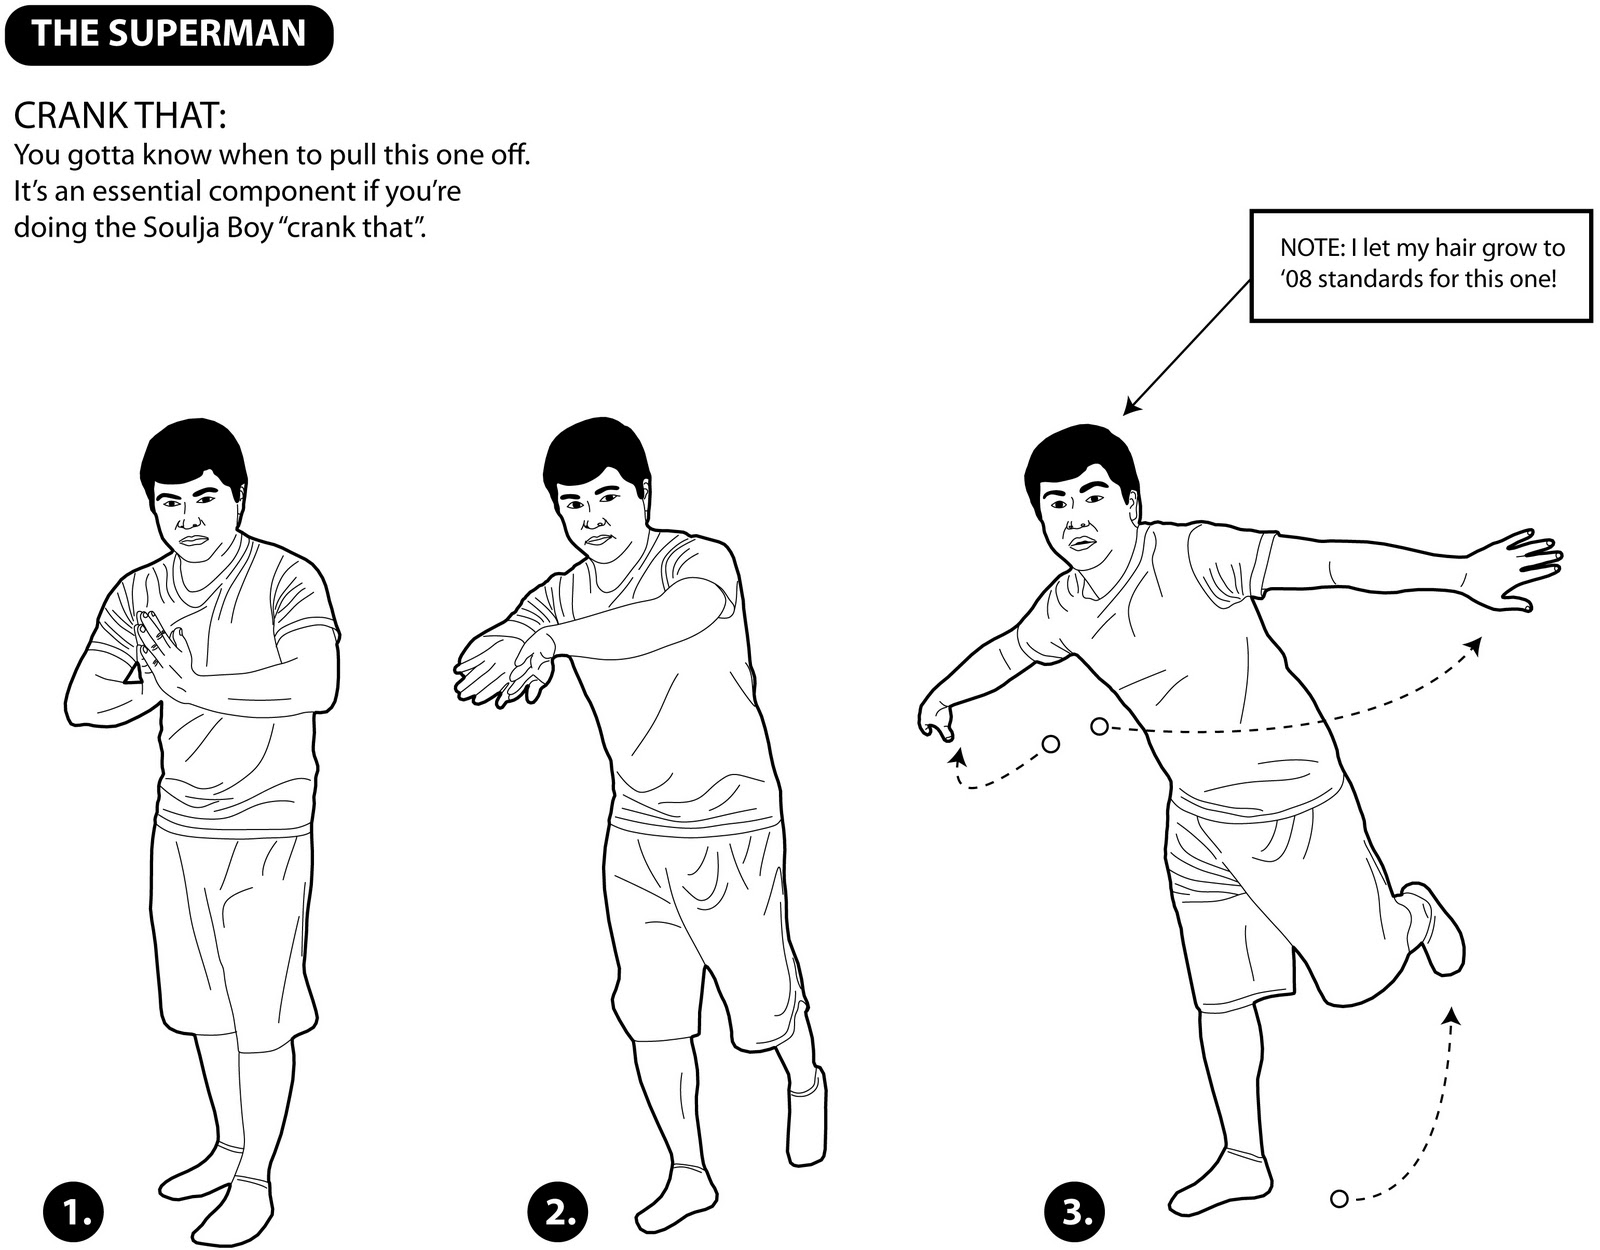 Learn By Diagram  Learn Some Dance Moves  The Superman